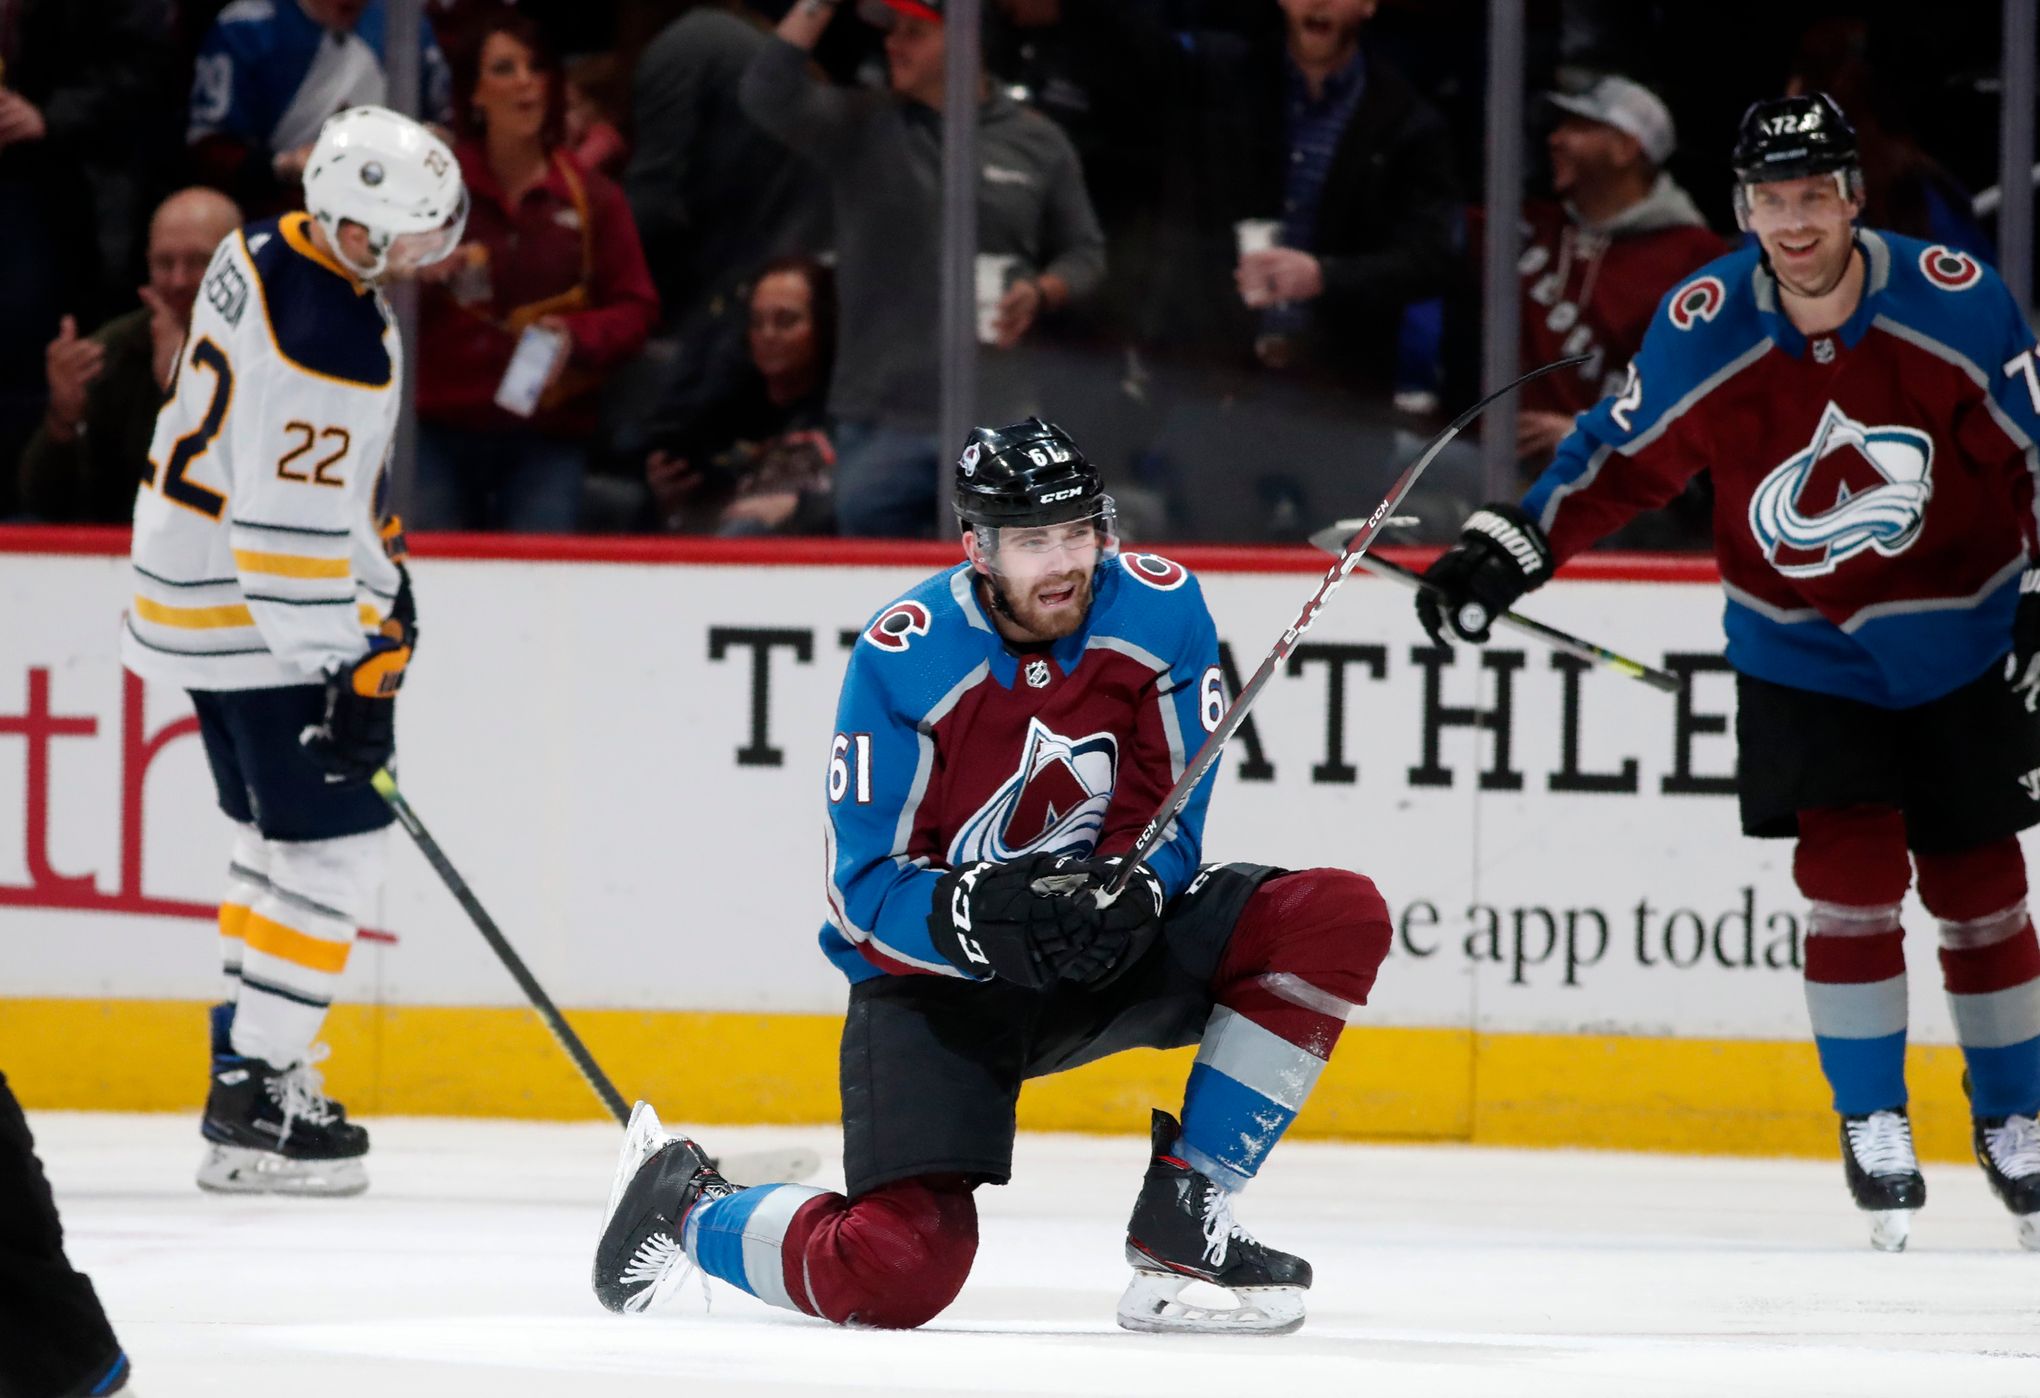 Compher, Francouz lead Avalanche to 3-2 win over Sabres - Sentinel